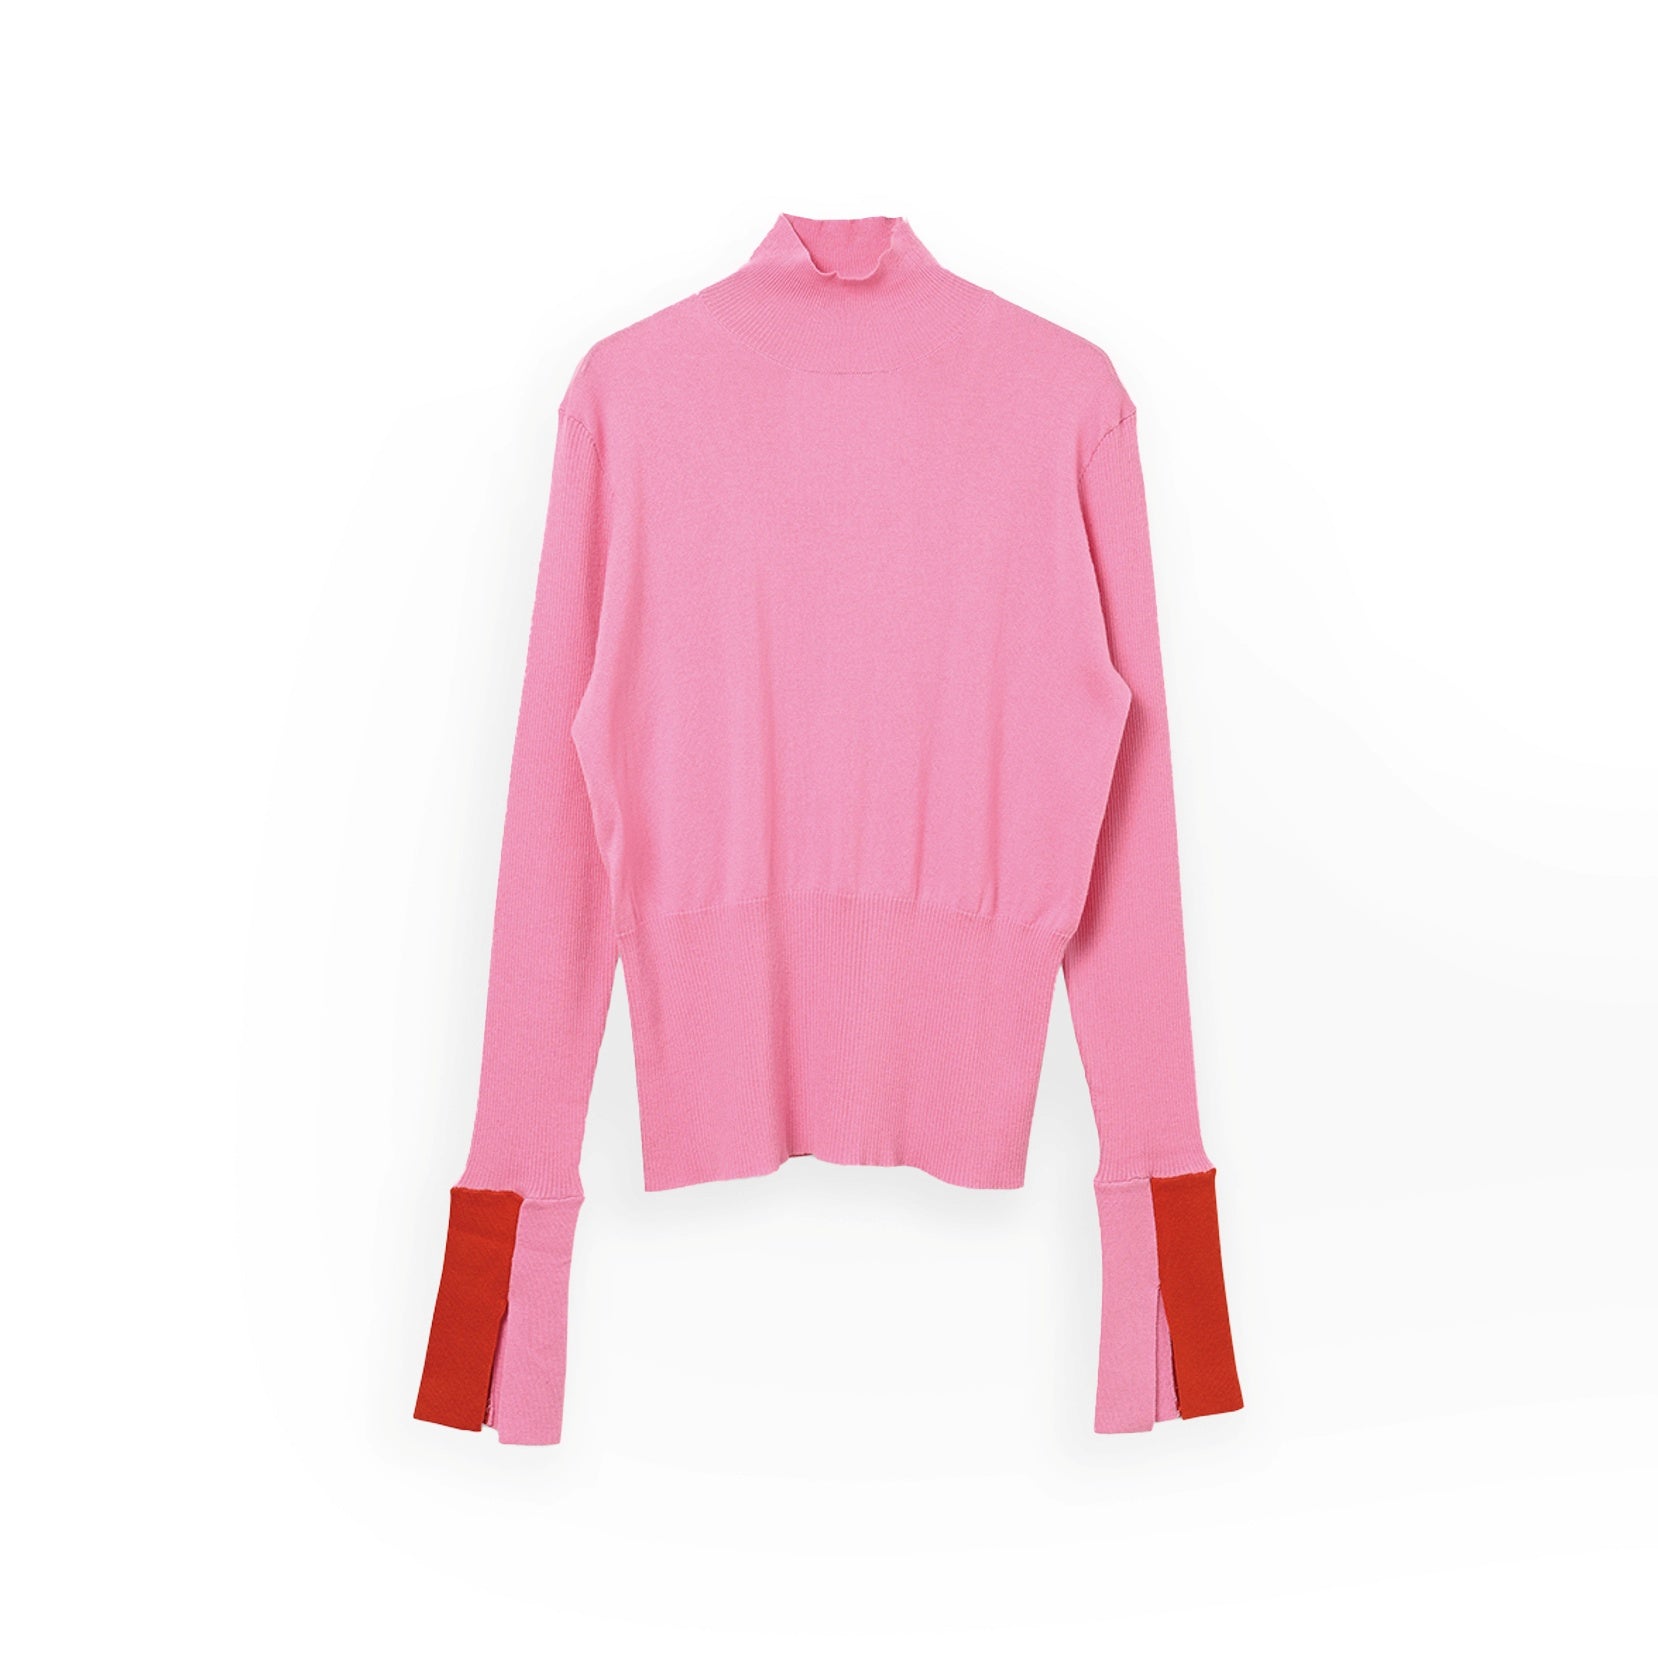 No:WHT24FKN4031_PINK | Name:color block knit | Color:Pink【WHYTO_ホワイト】【入荷予定アイテム・入荷連絡可能】